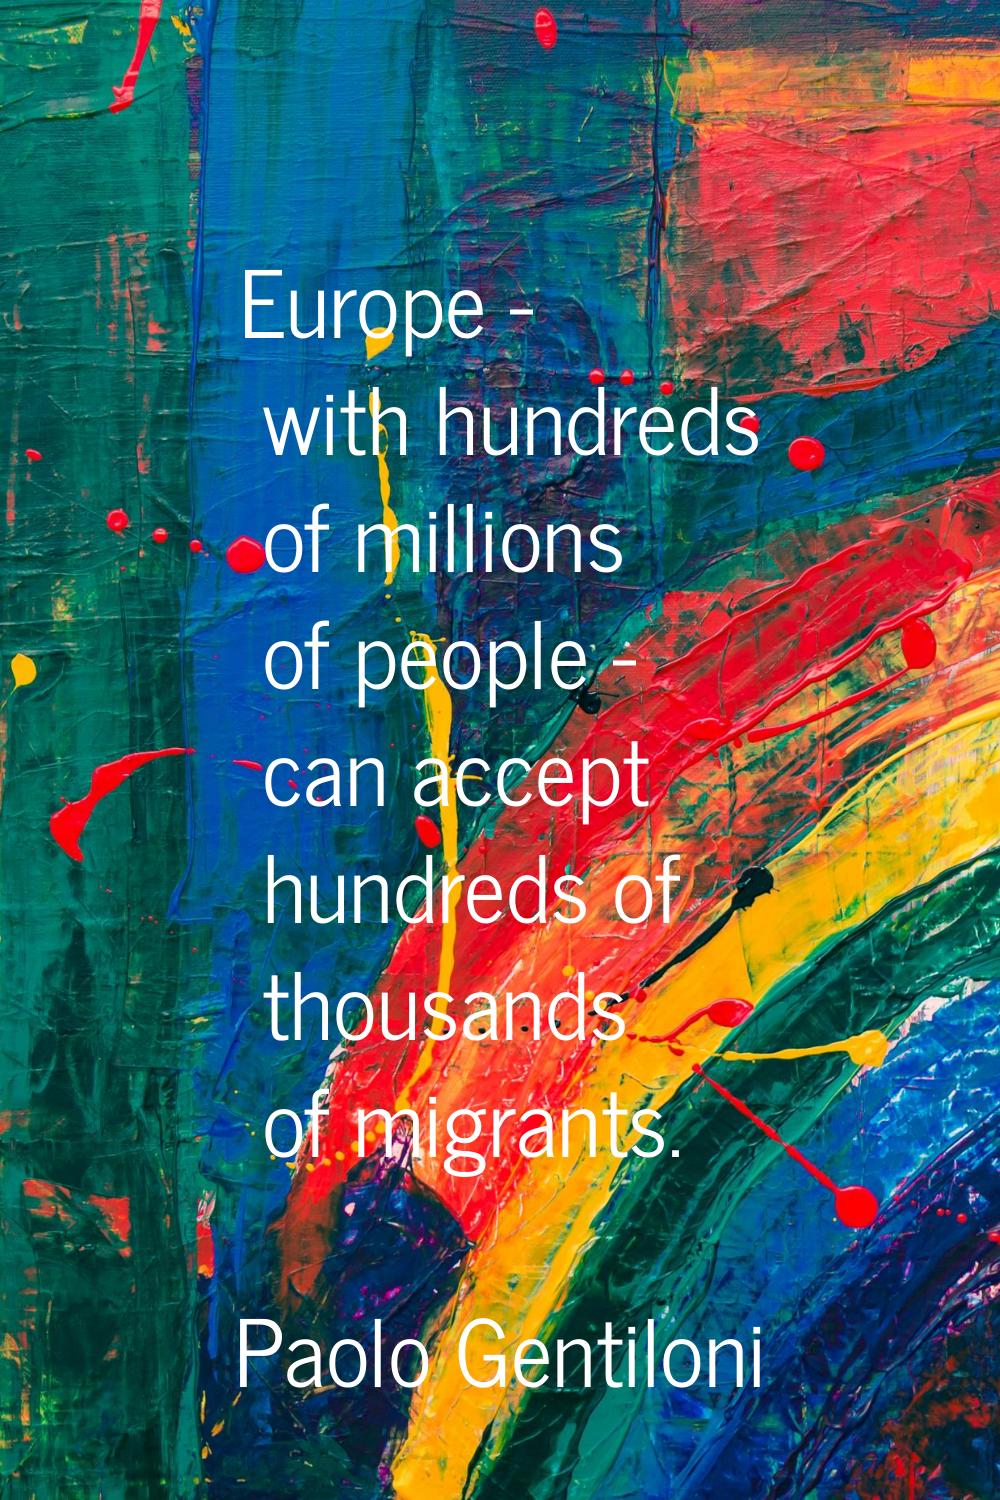 Europe - with hundreds of millions of people - can accept hundreds of thousands of migrants.